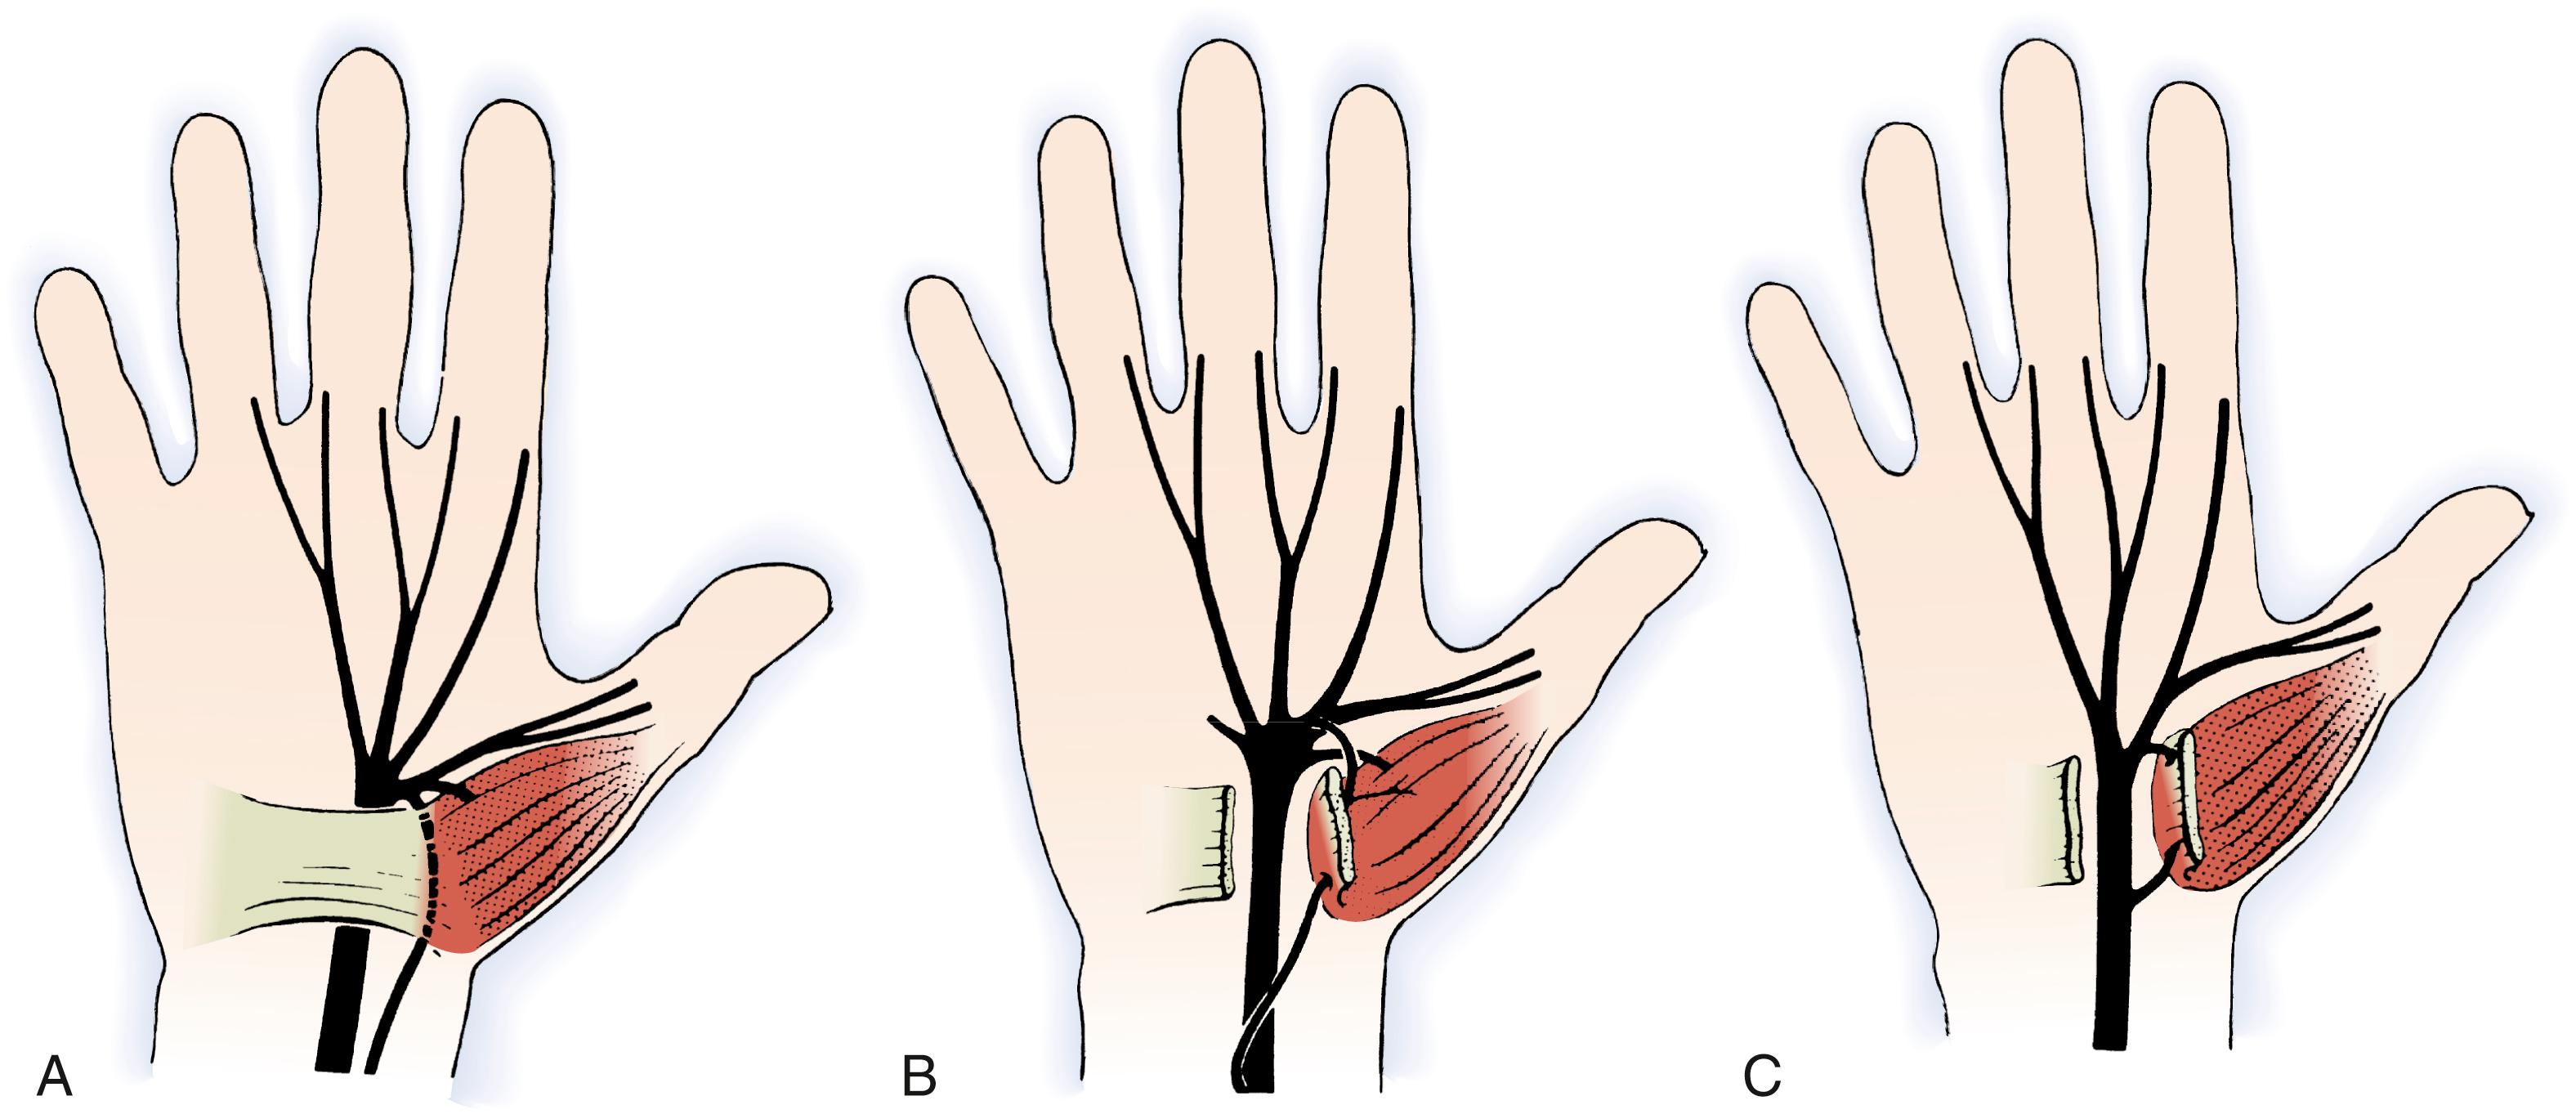 Fig. 28.7, Variations in median nerve anatomy in the carpal tunnel. Group IV variations include rare instances in which the thenar branch leaves the median nerve proximal to the carpal tunnel: A, accessory branch; B, accessory branch from the ulnar aspect of the median nerve; C, accessory branch running directly into the thenar musculature.